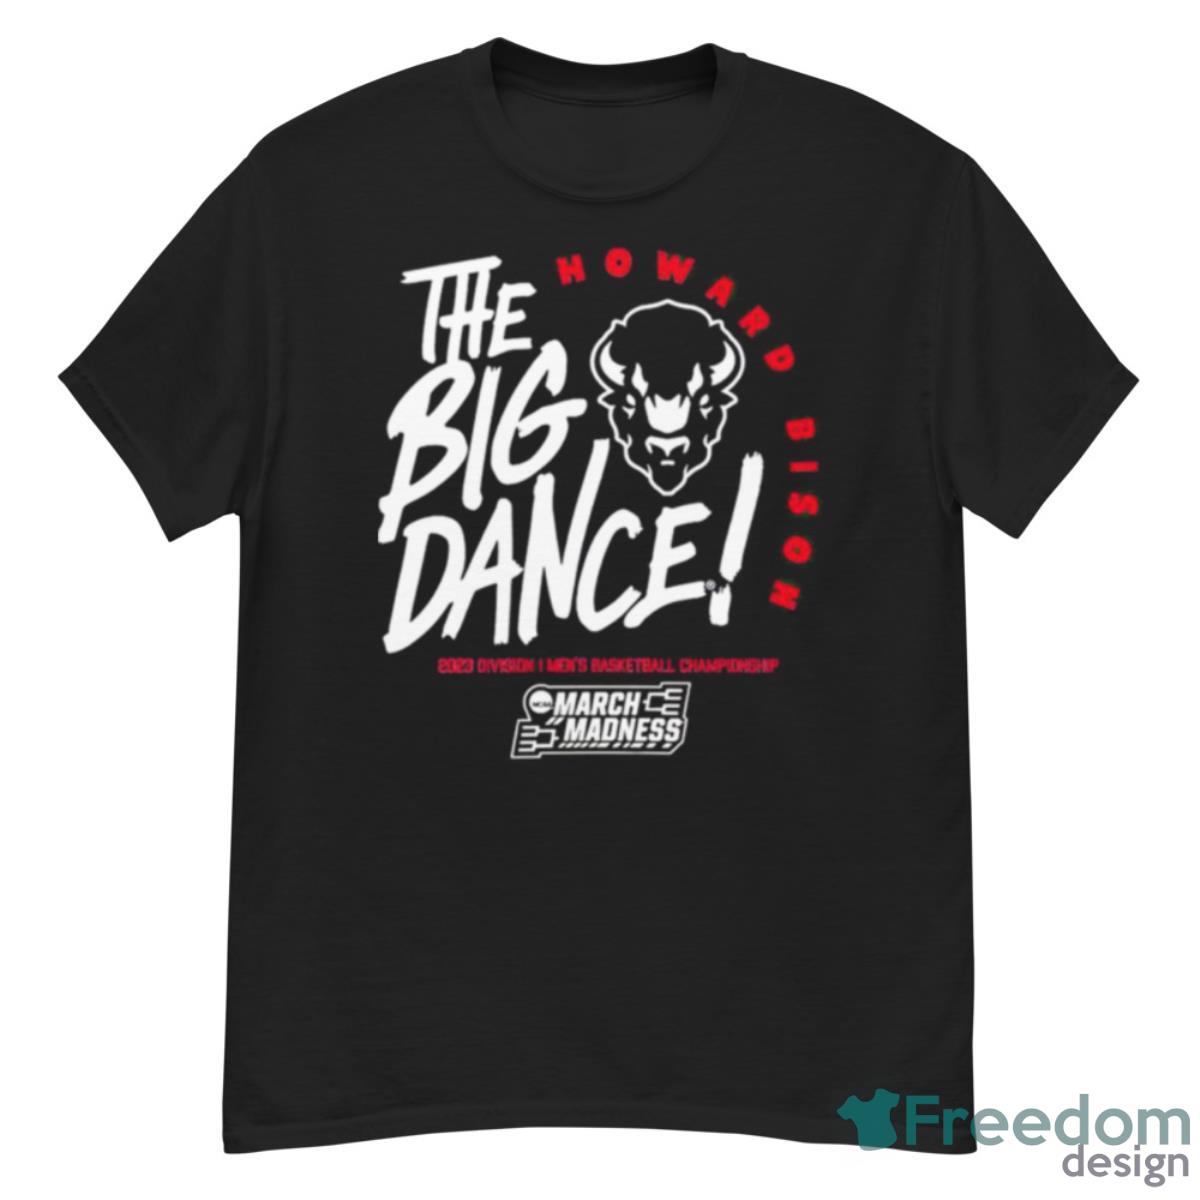 Howard Bison The Big Dance March Madness 2023 Division Men’s Basketball Championship Shirt - G500 Men’s Classic T-Shirt